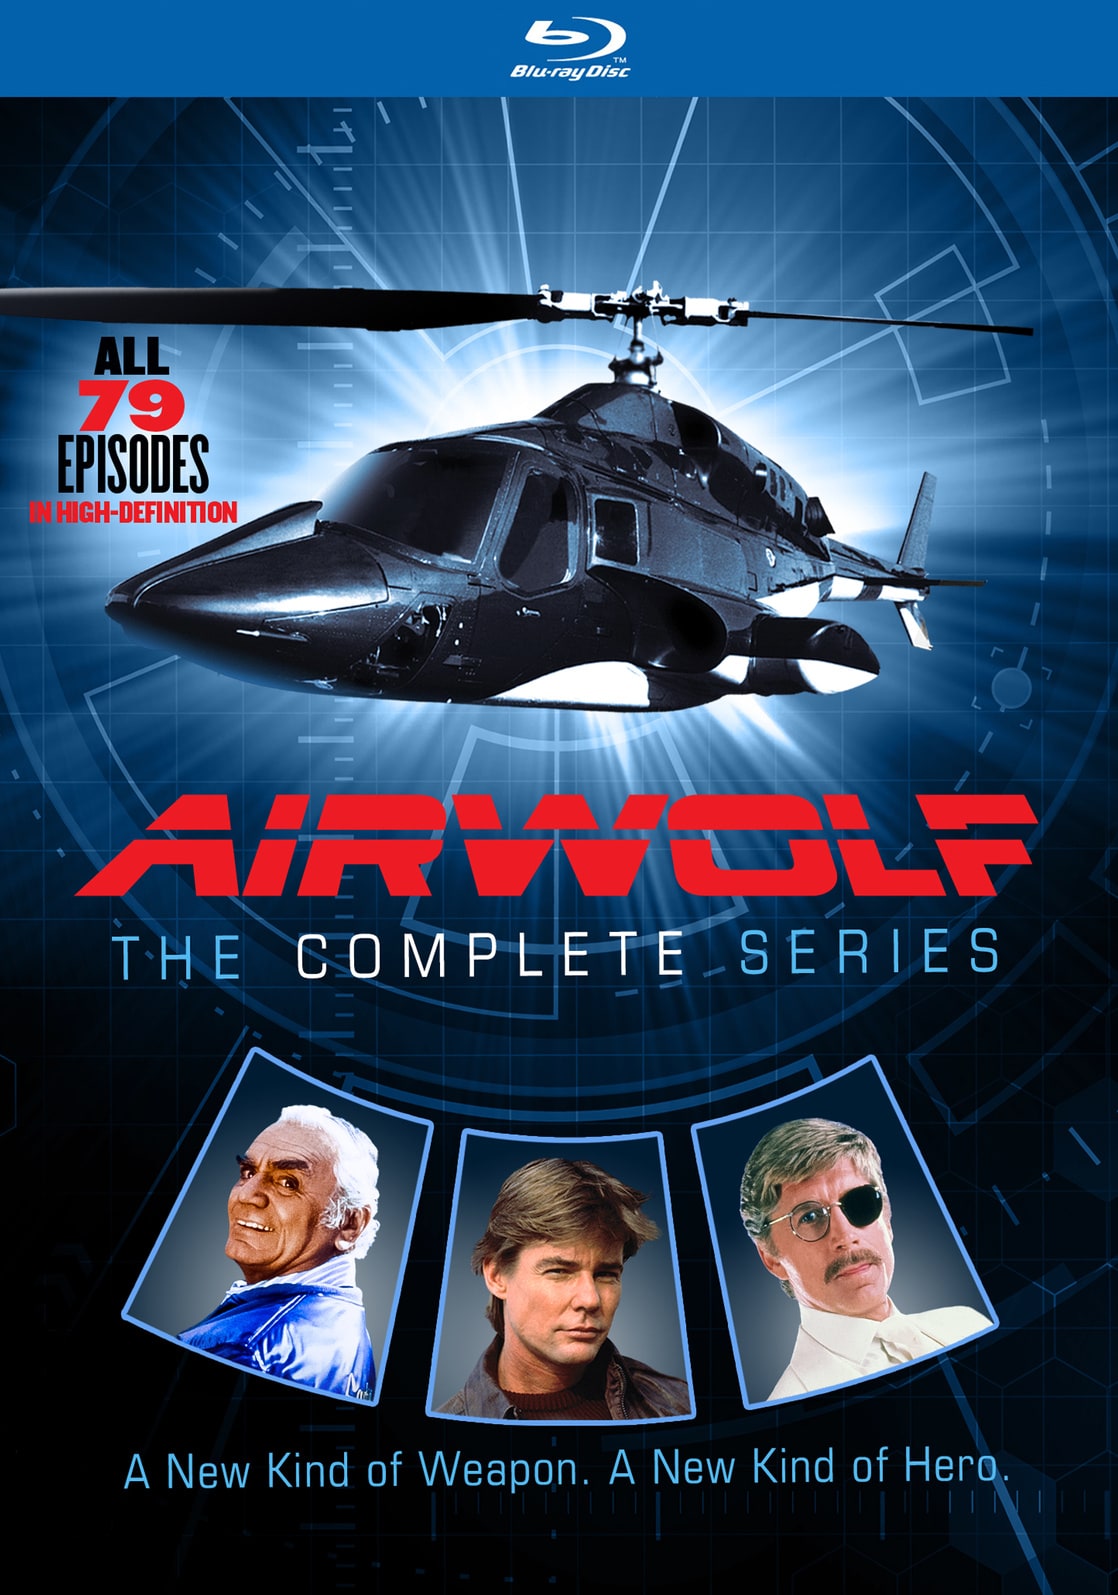 Airwolf - The Complete Series - BD 